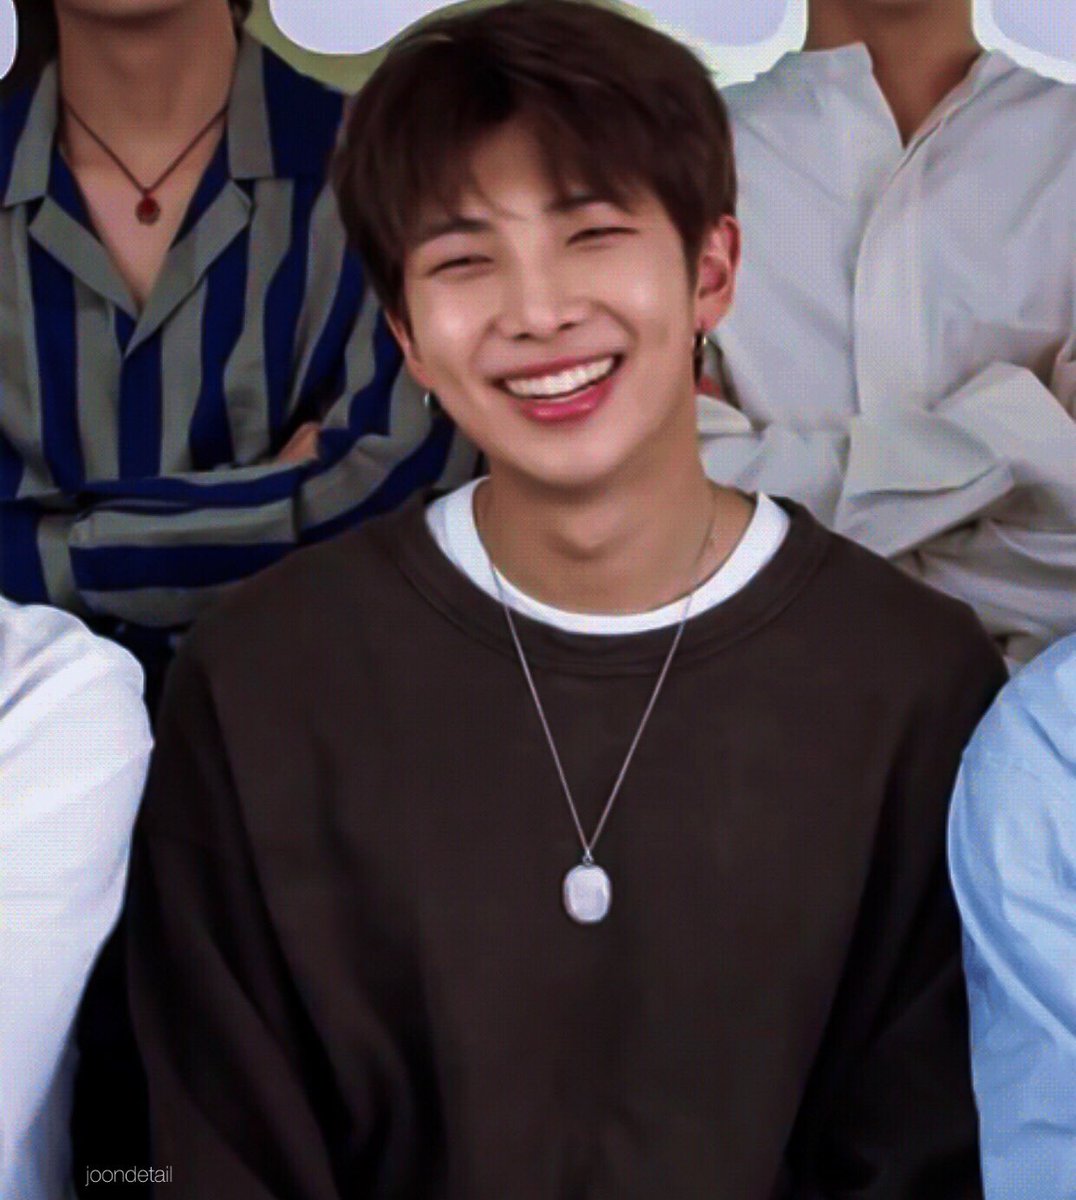 he has the prettiest smile